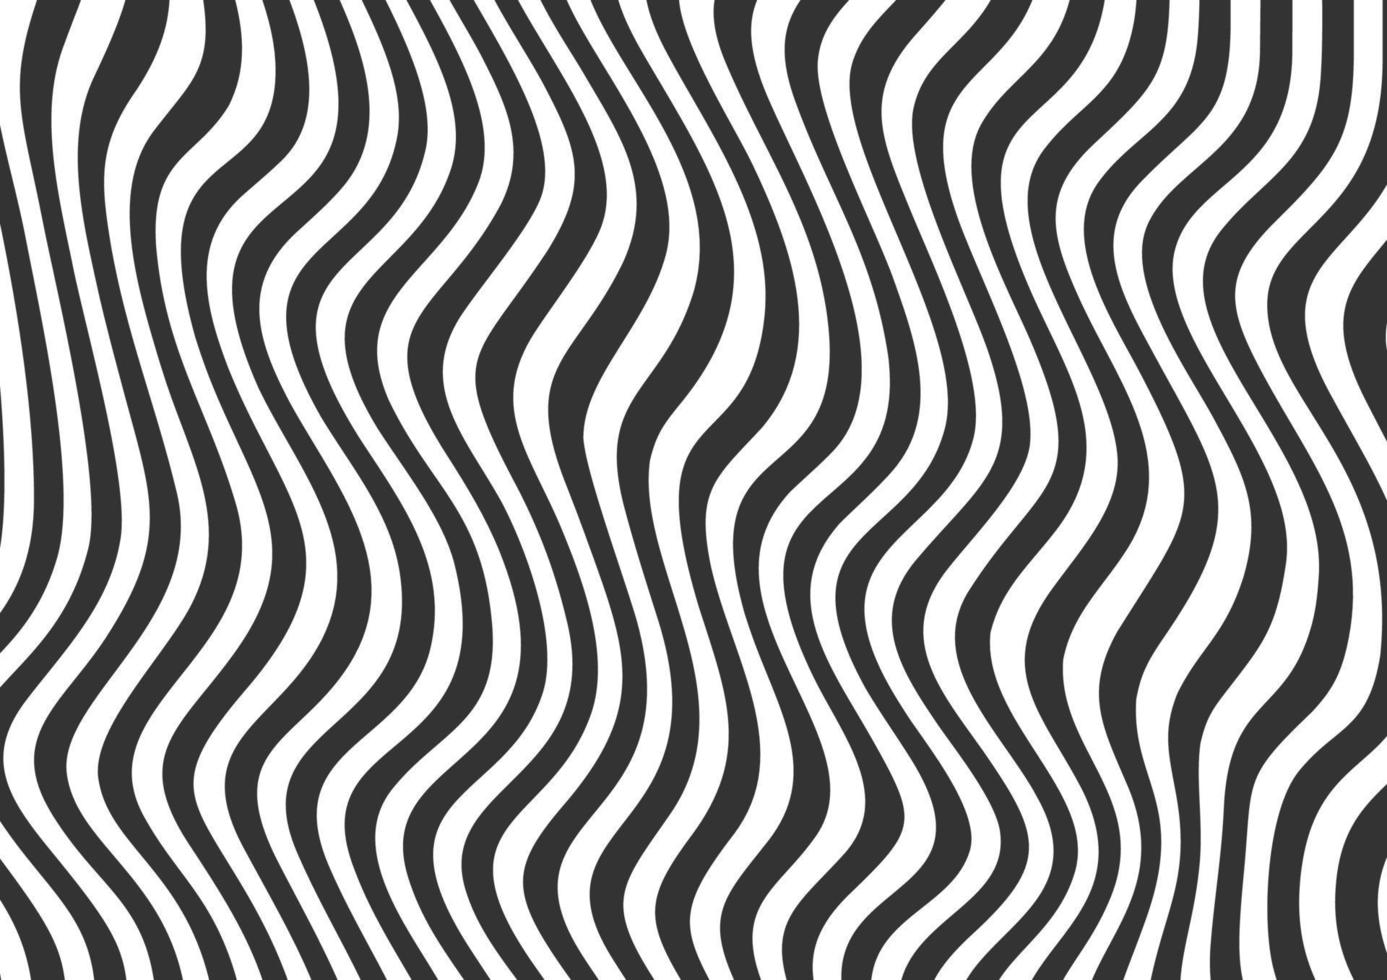 Abstract black and white wavy lines striped background vector